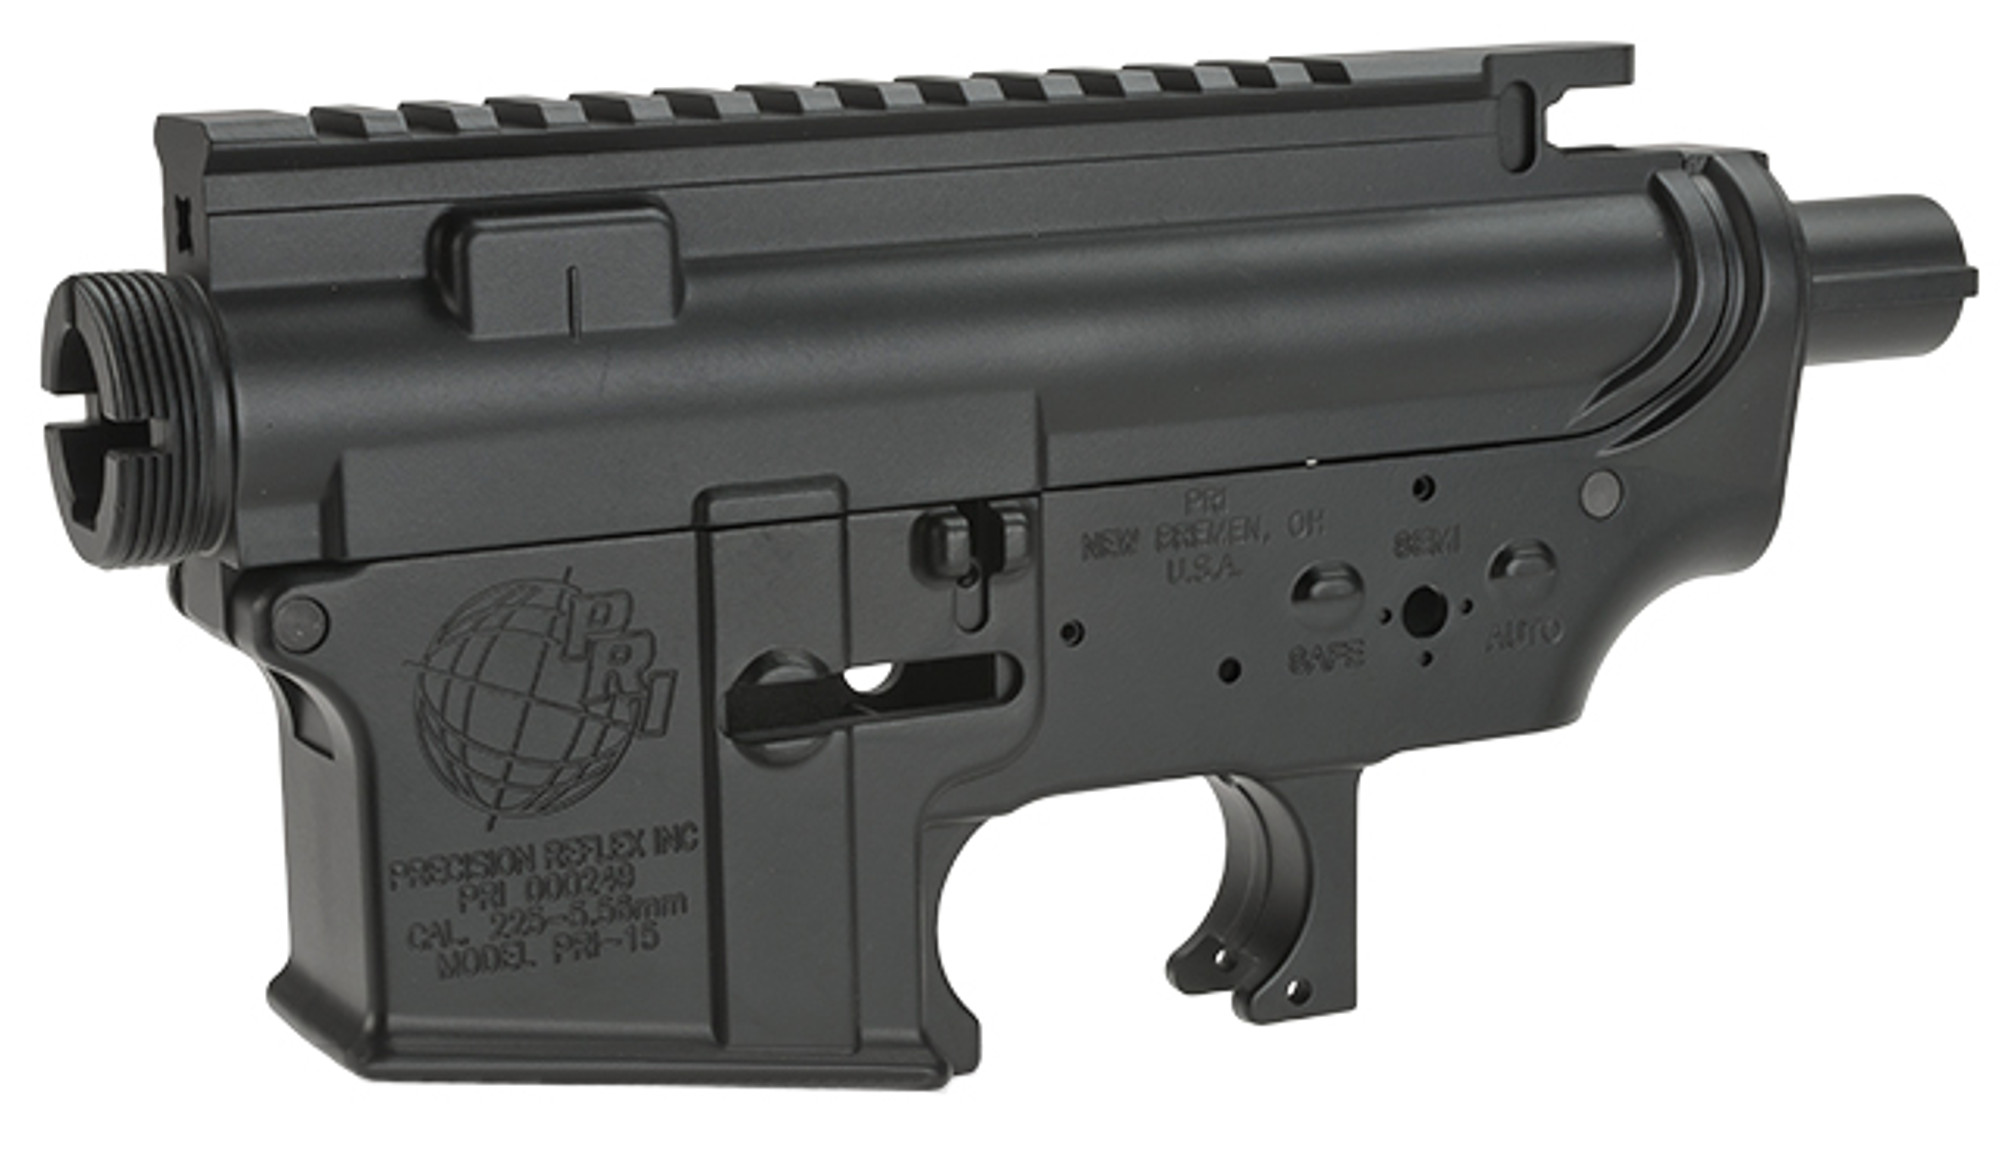 Officially Licensed PRI Version 2 Full Metal Receiver for Airsoft M4M16 AEGs by Madbull - Black